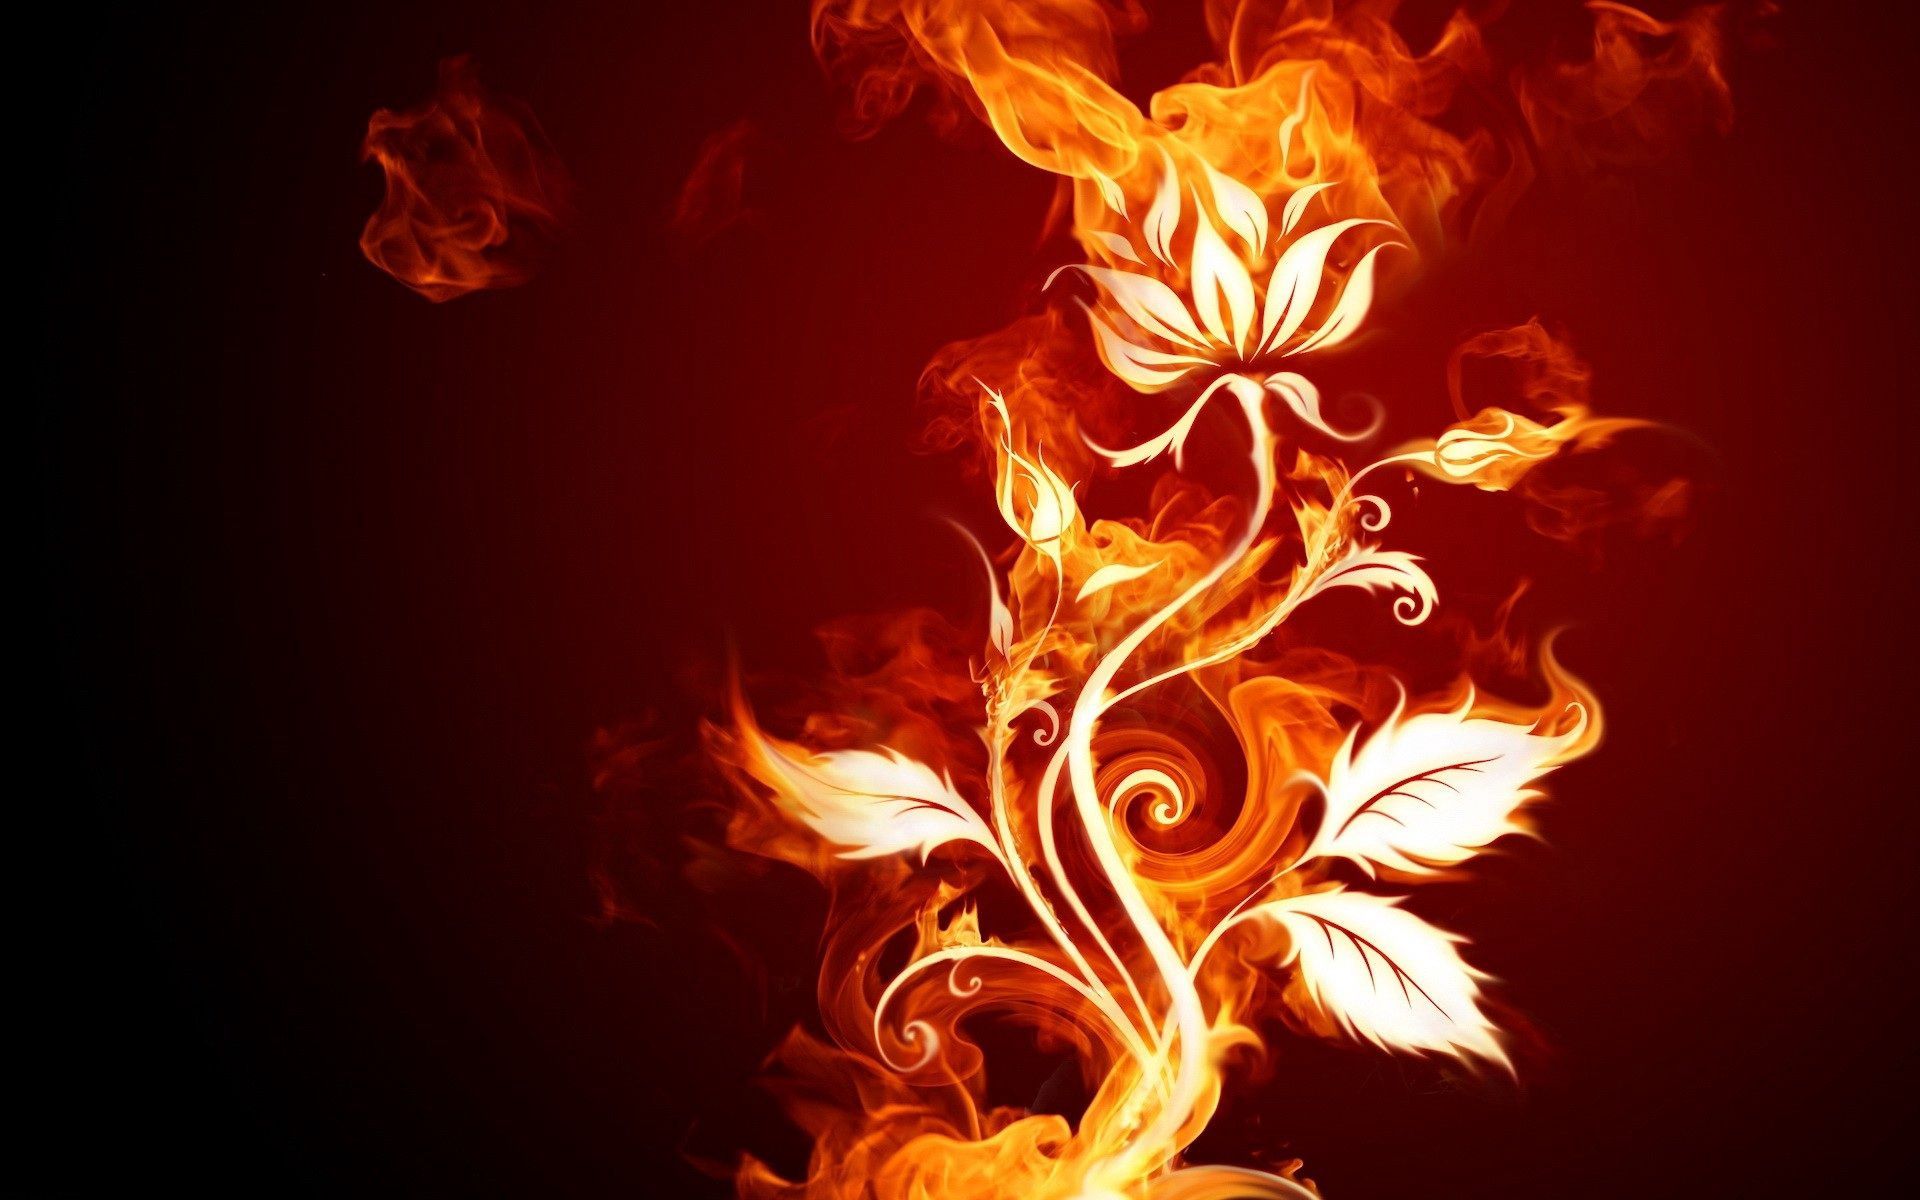 Download wallpaper 1920x1200 rose, fire, patterns, background HD background